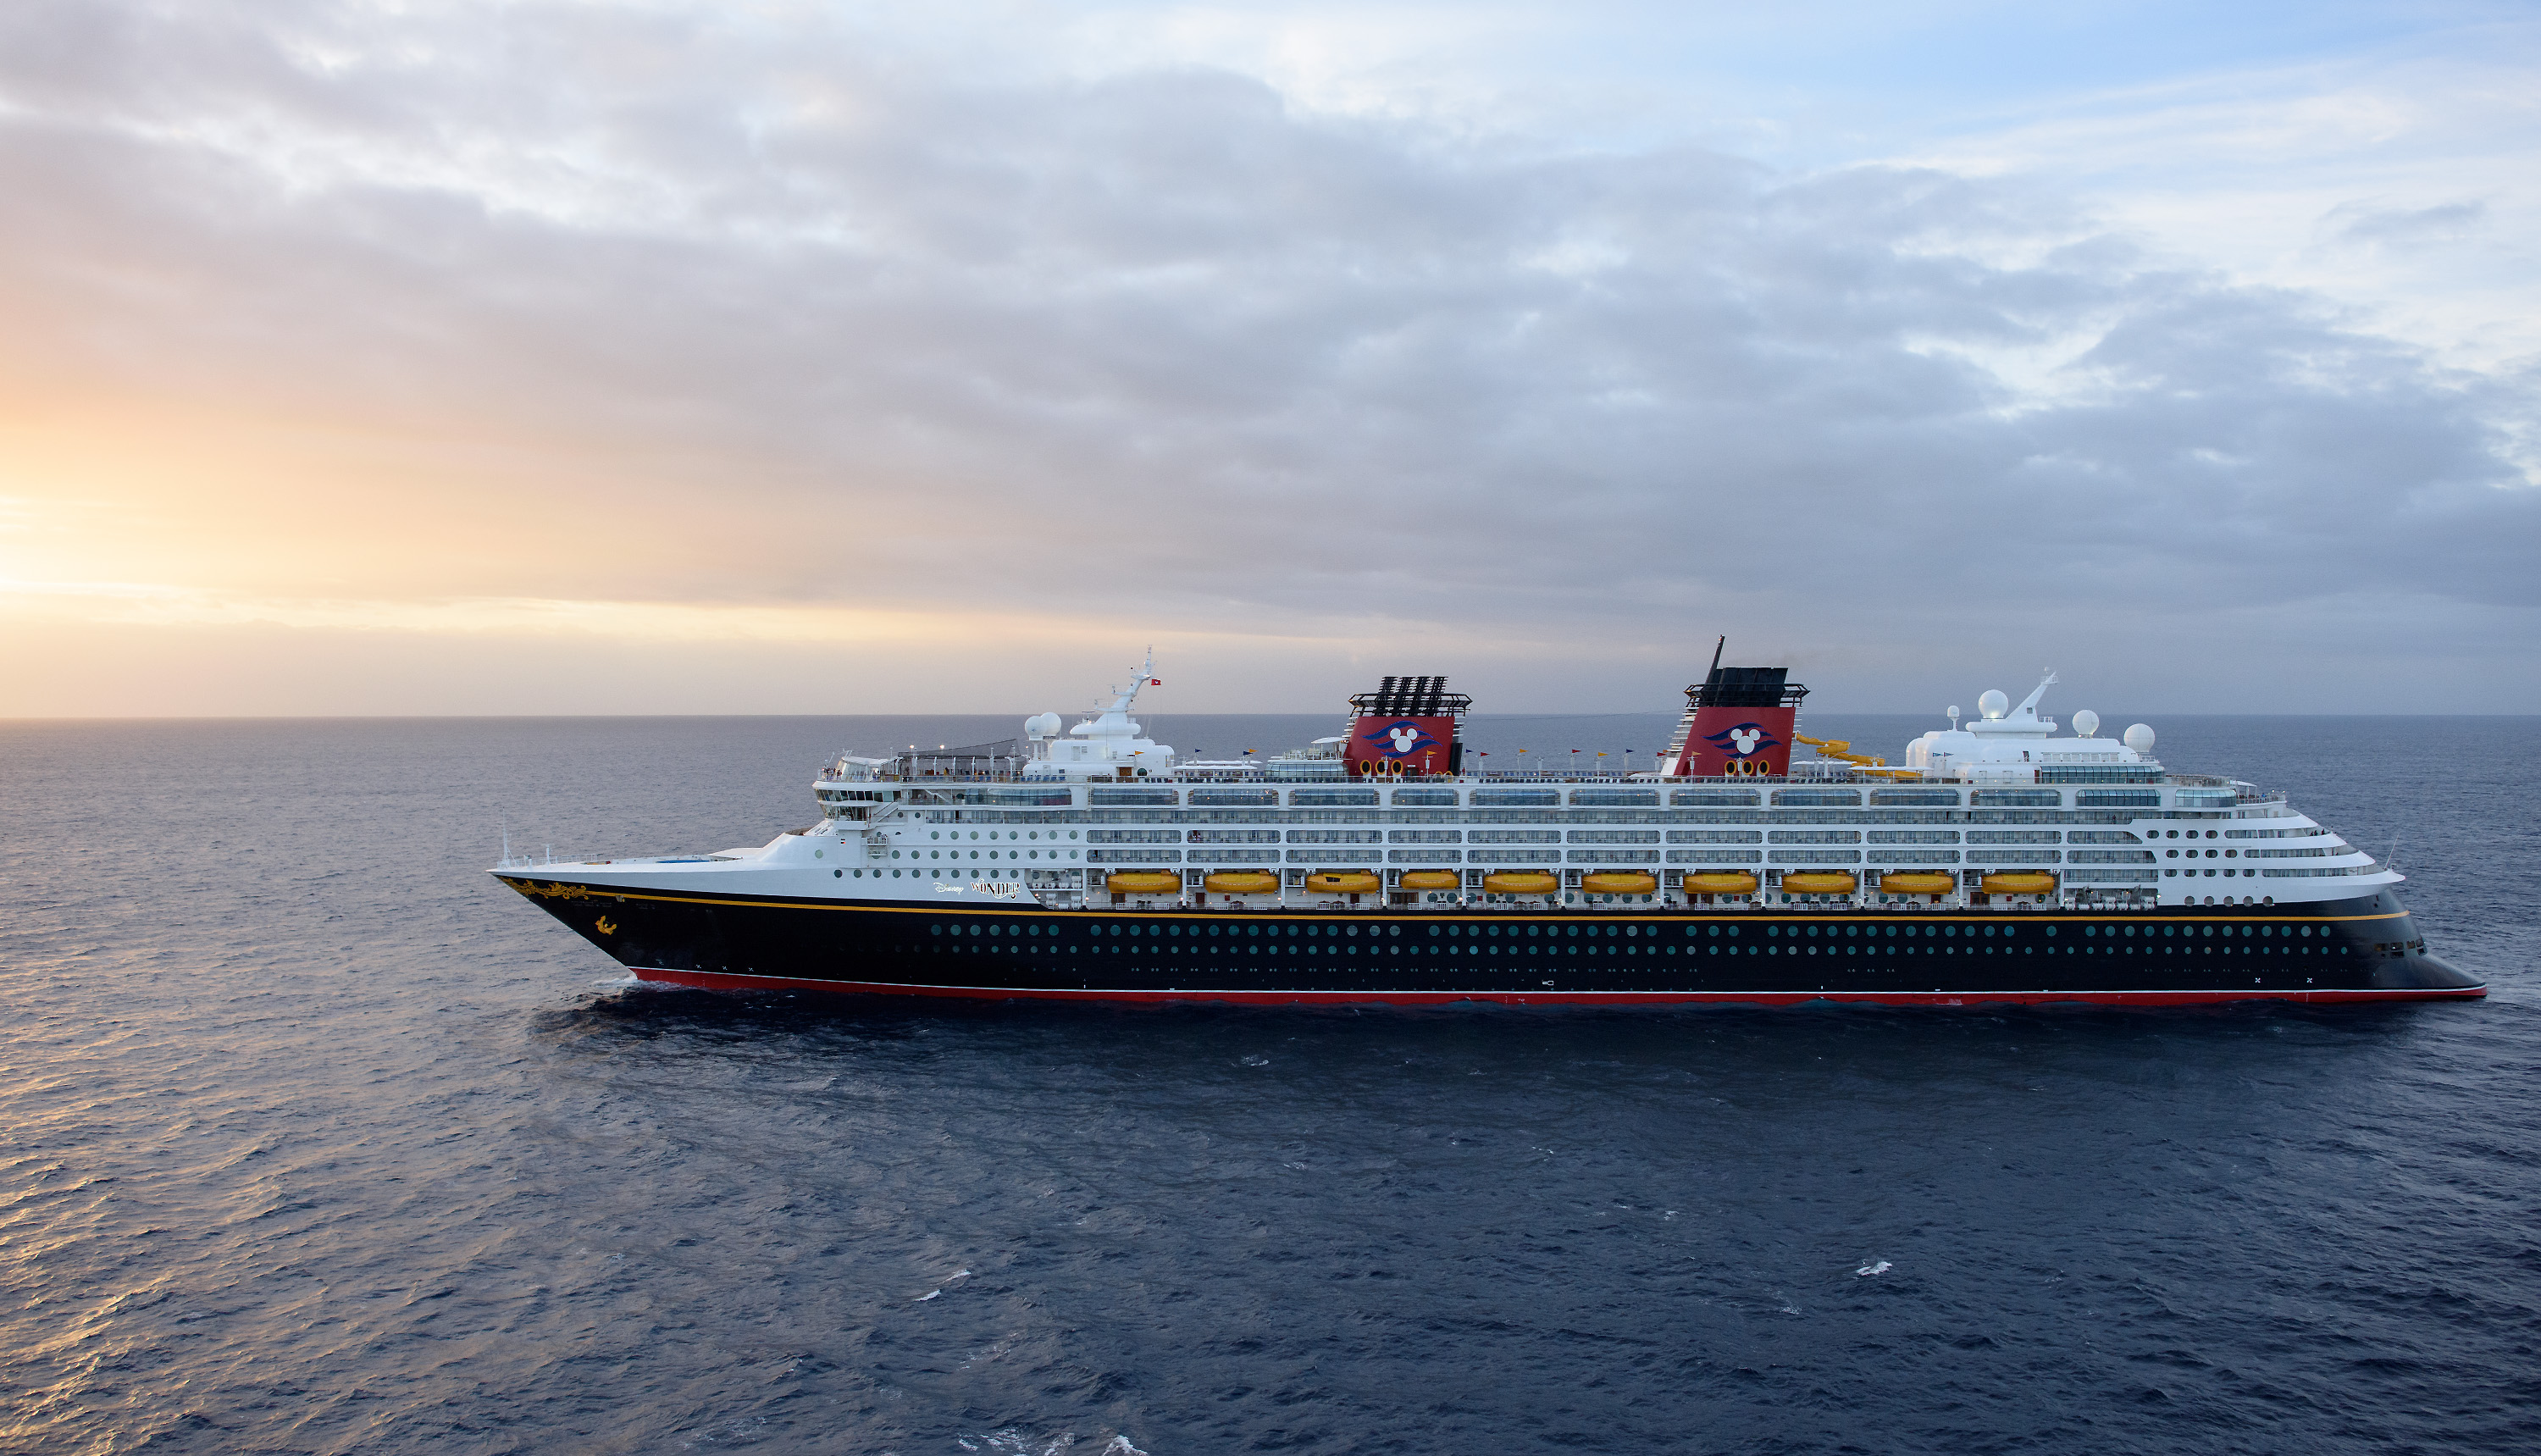 Disney Cruise Line extends suspension of all departures through 2020